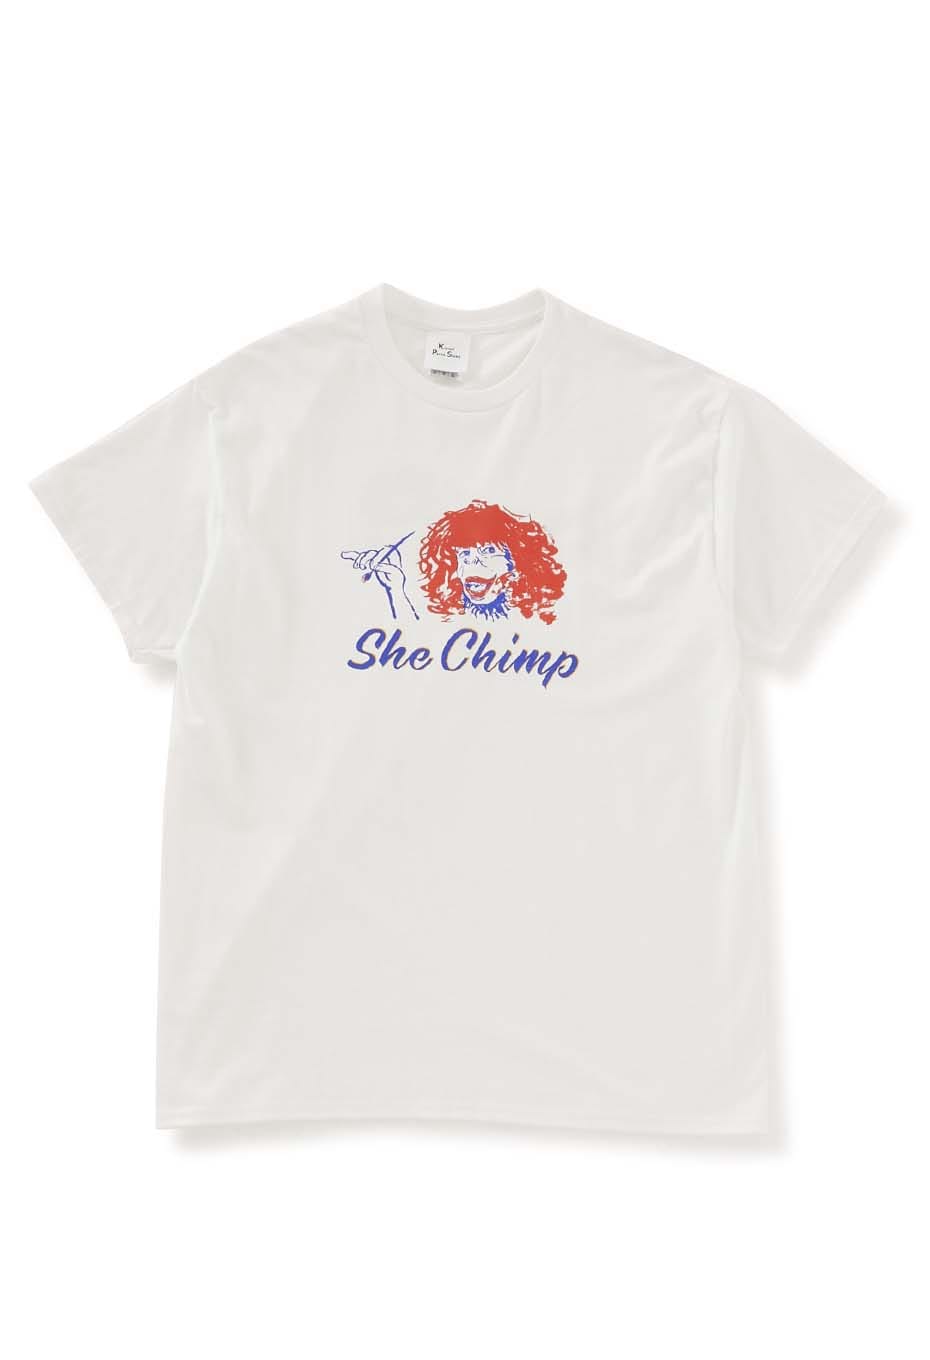 KLEVAY PAPER SIGN SHE CHIMPS S/S TEE